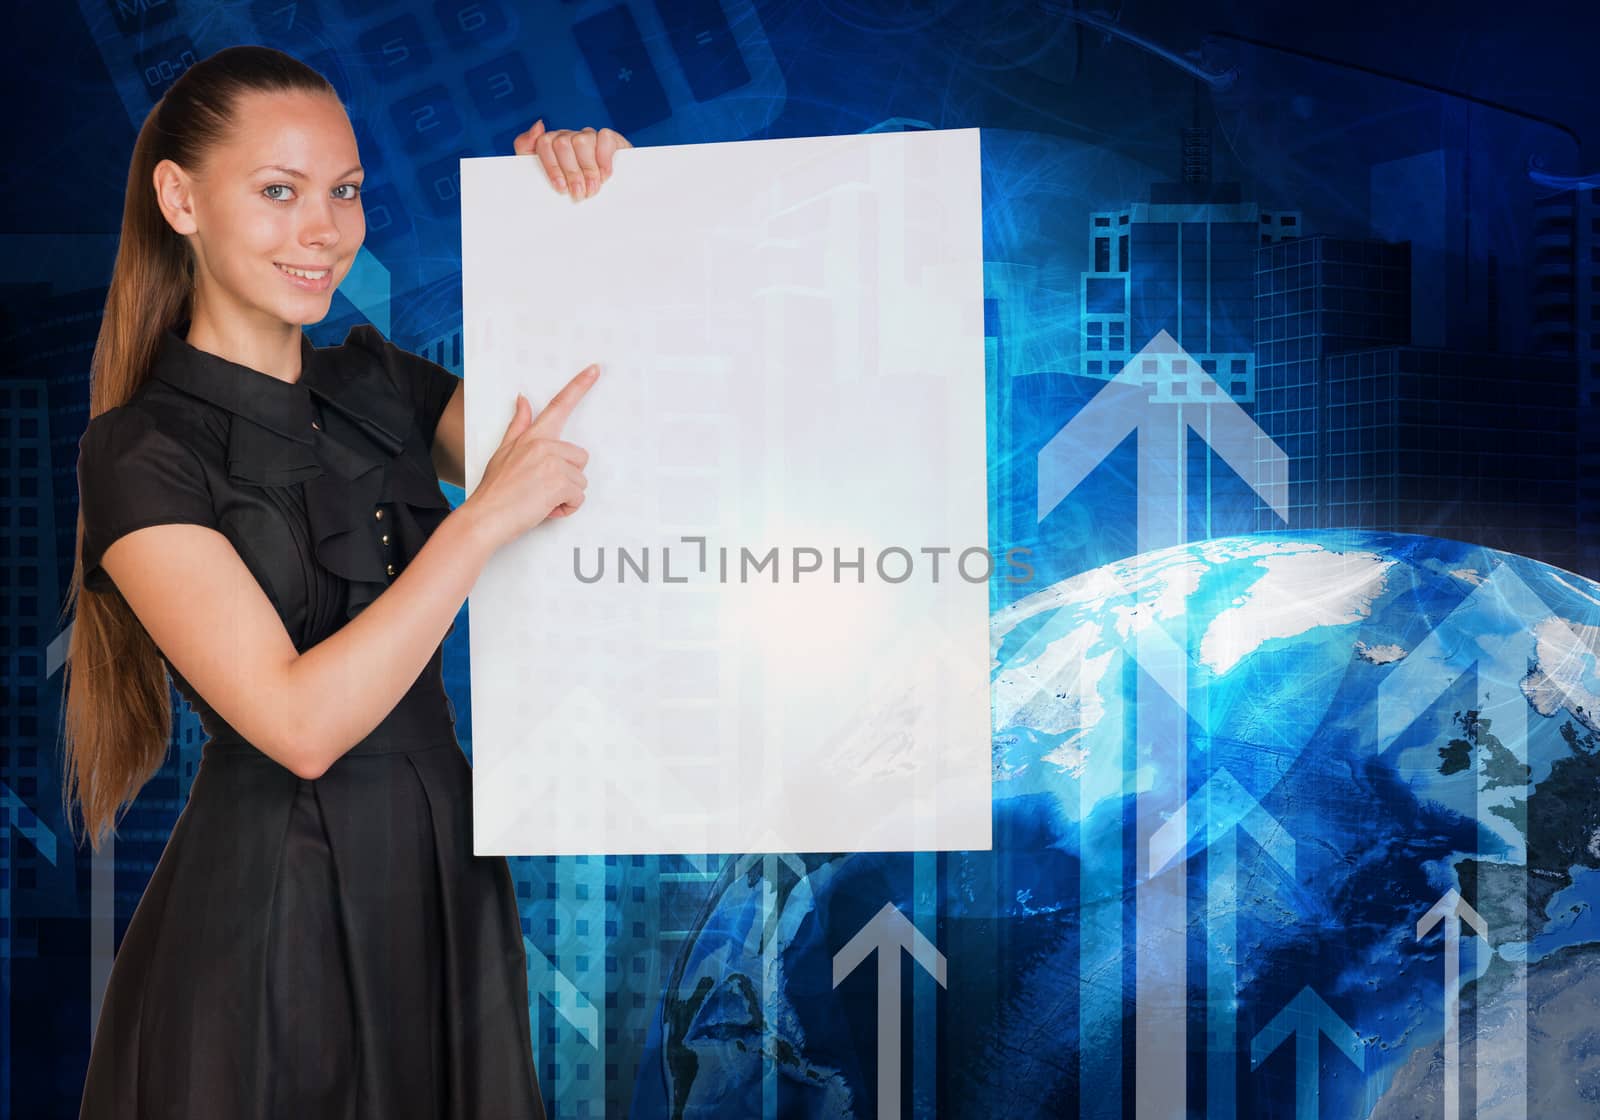 Beautiful businesswoman in dress smiling and holding empty paper sheet. Earth, arrows and buildings on background. Elements of this image furnished by NASA